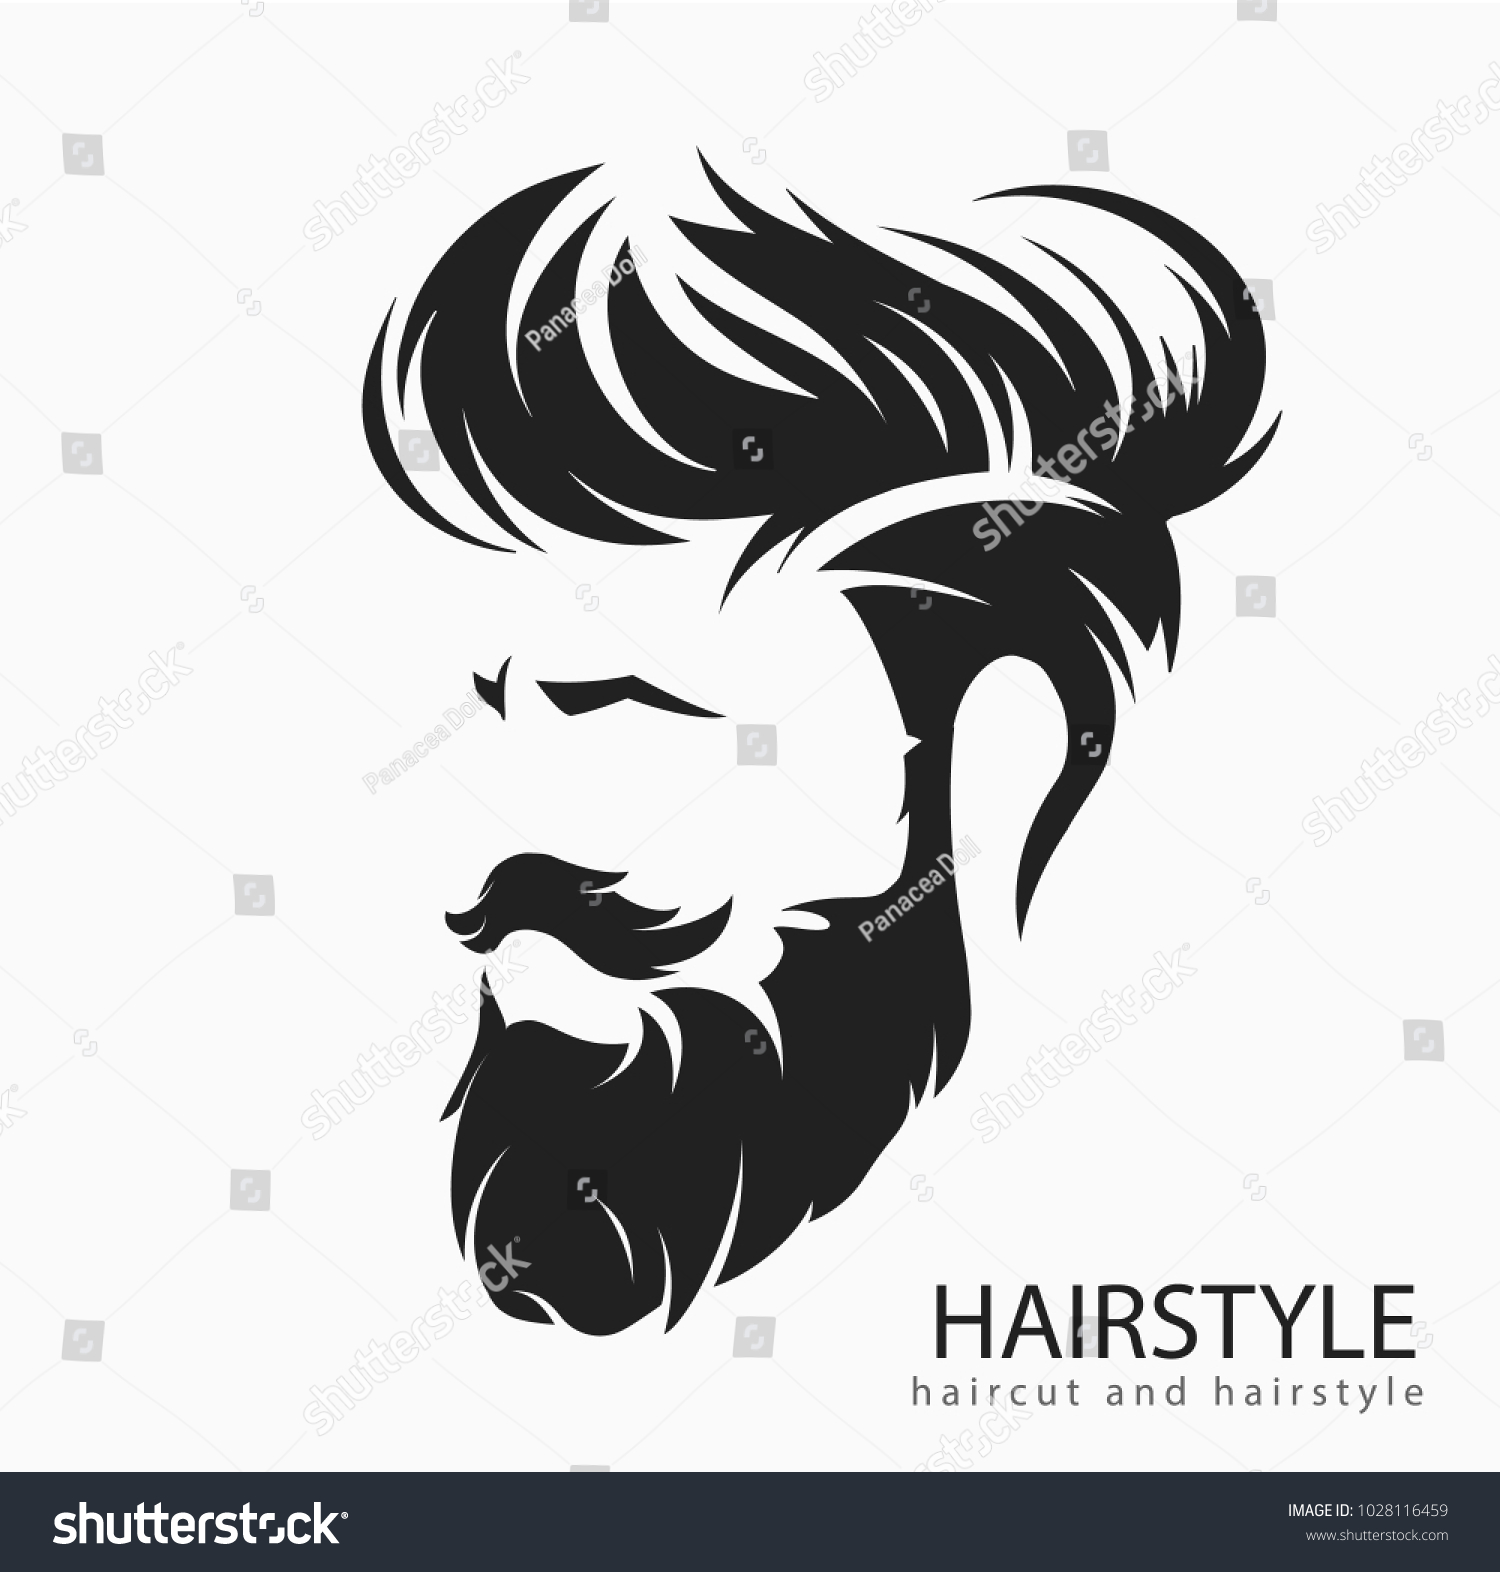 mens hairstyle and hirecut with beard mustache - Royalty Free Stock ...